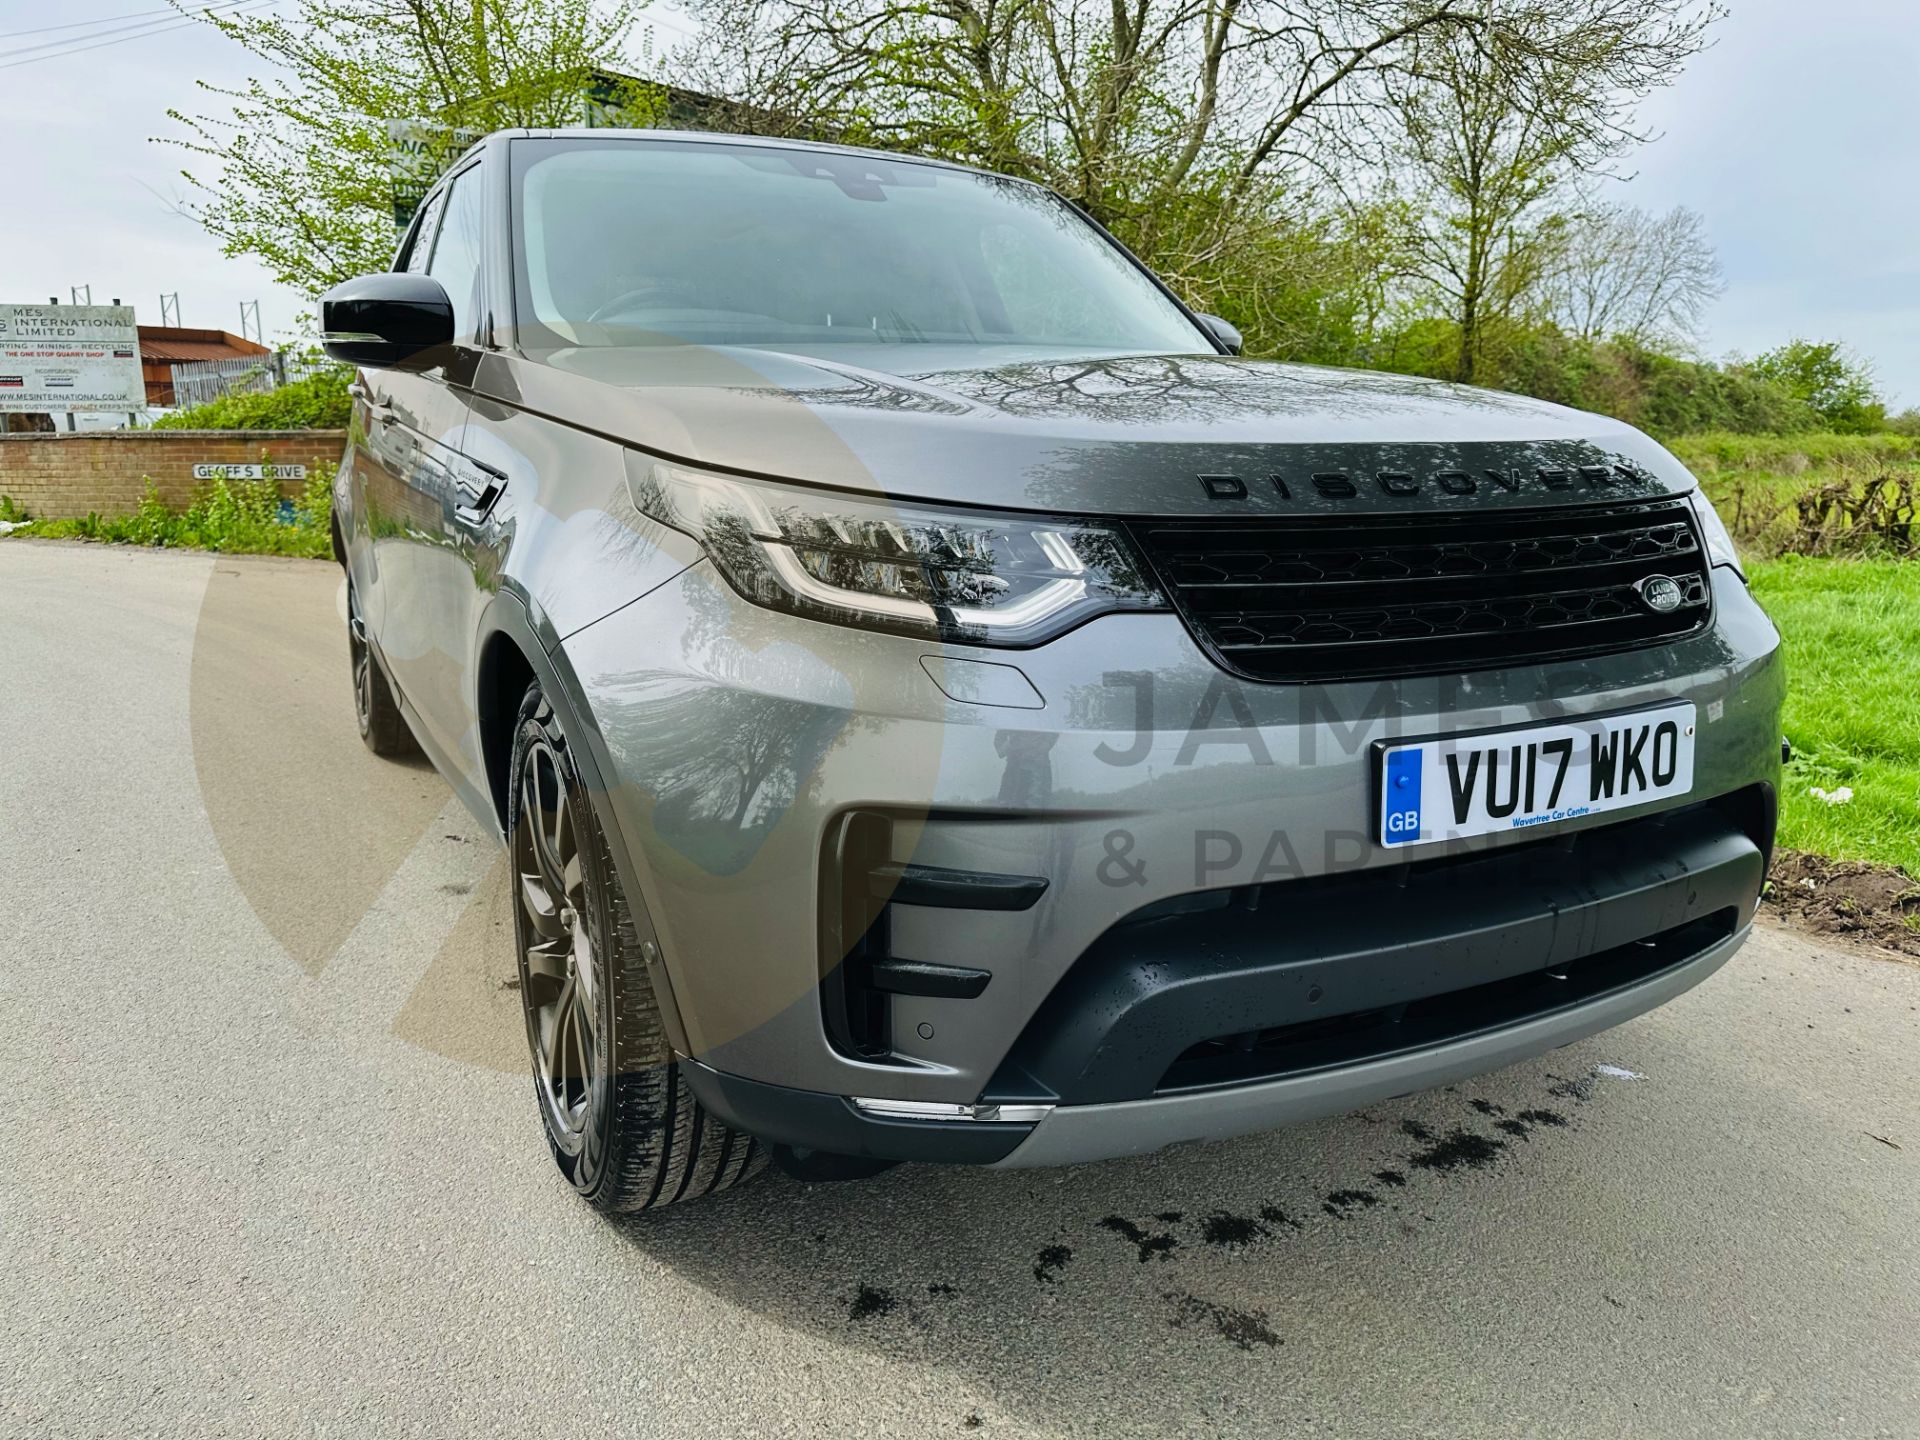 (On Sale) LAND ROVER DISCOVERY *HSE EDITION* AUTOMATIC (2017) 7 SEATER-ONLY 89K MILES - FULLY LOADED - Image 3 of 48